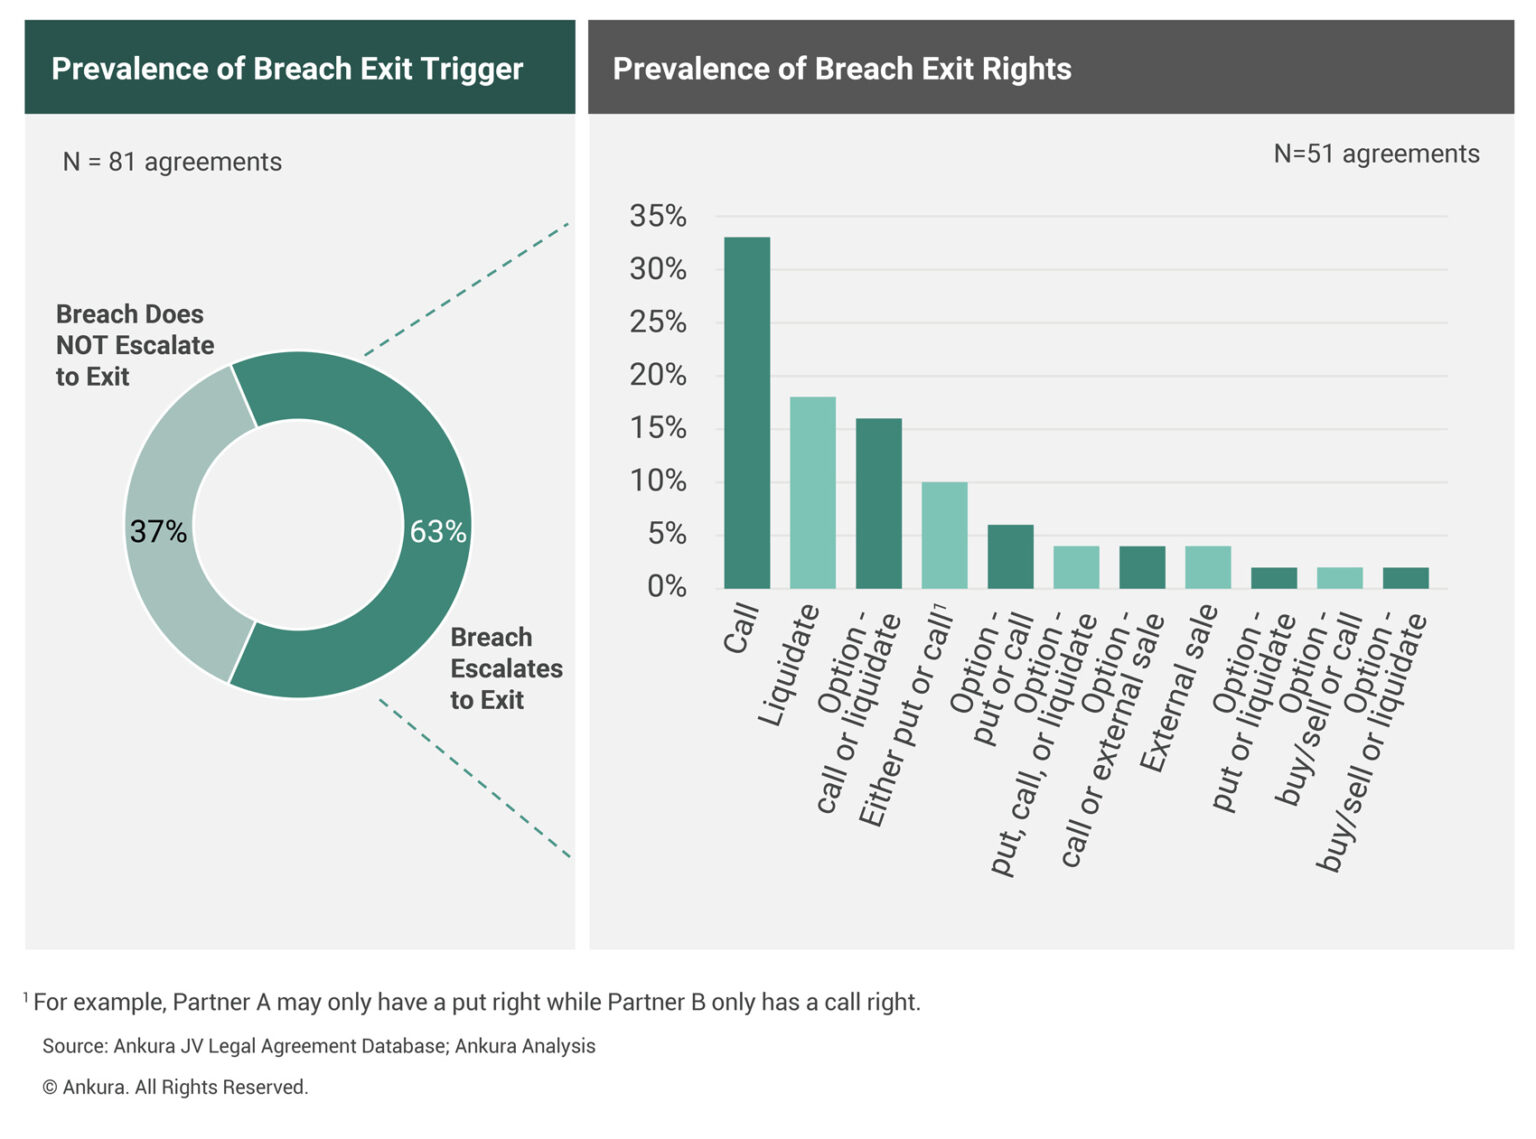 Exhibit 6: Prevalence of Exit Rights in Case of Partner Breach